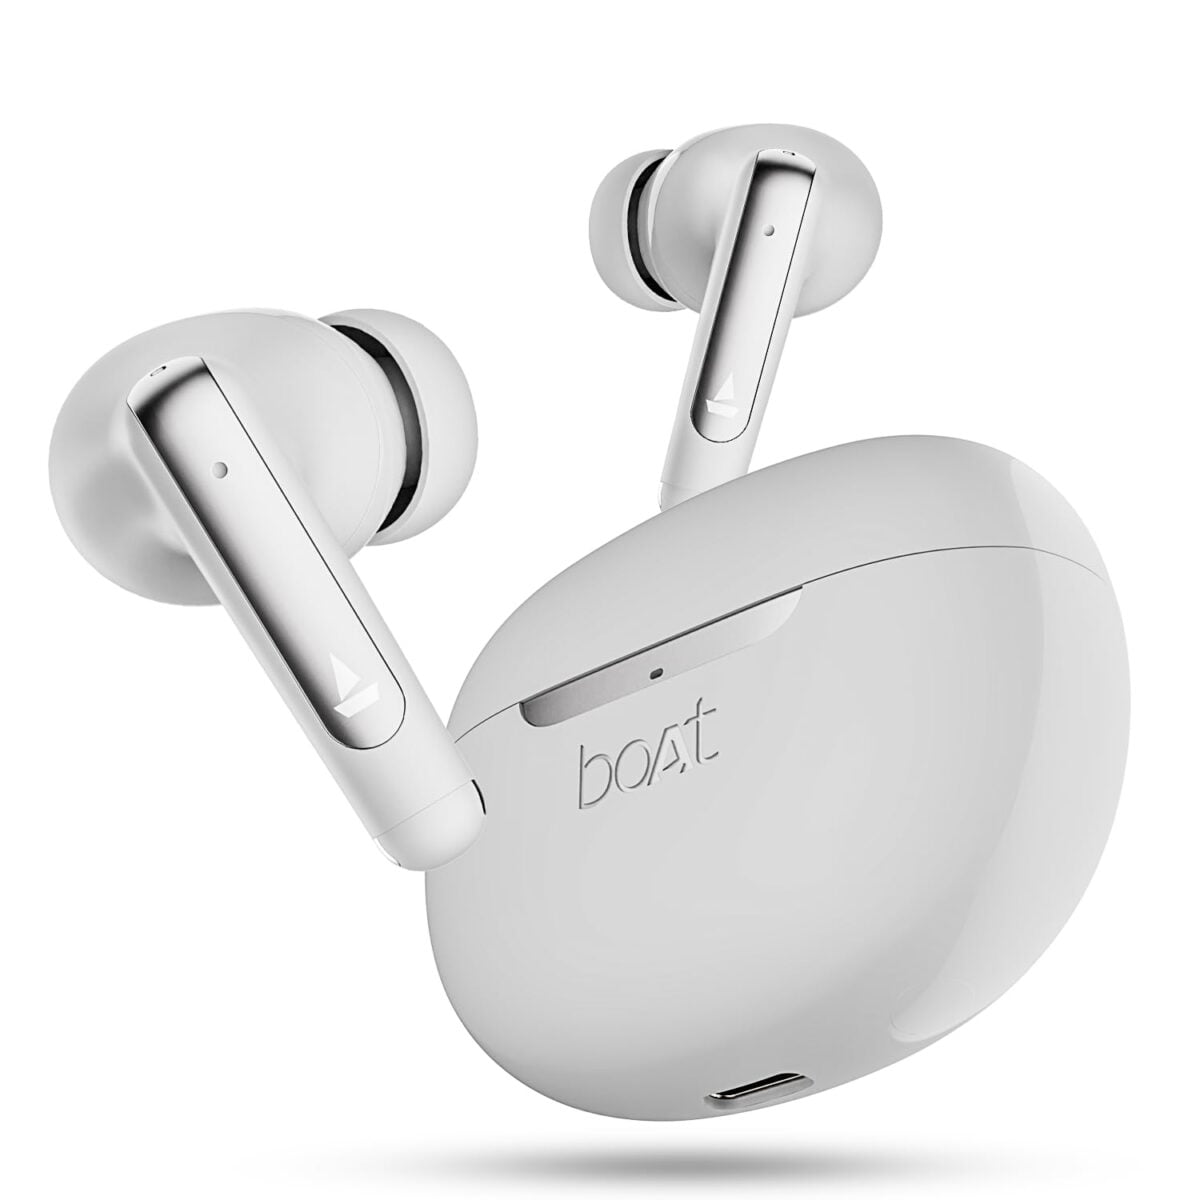 Boat airdopes 141 anc earbuds